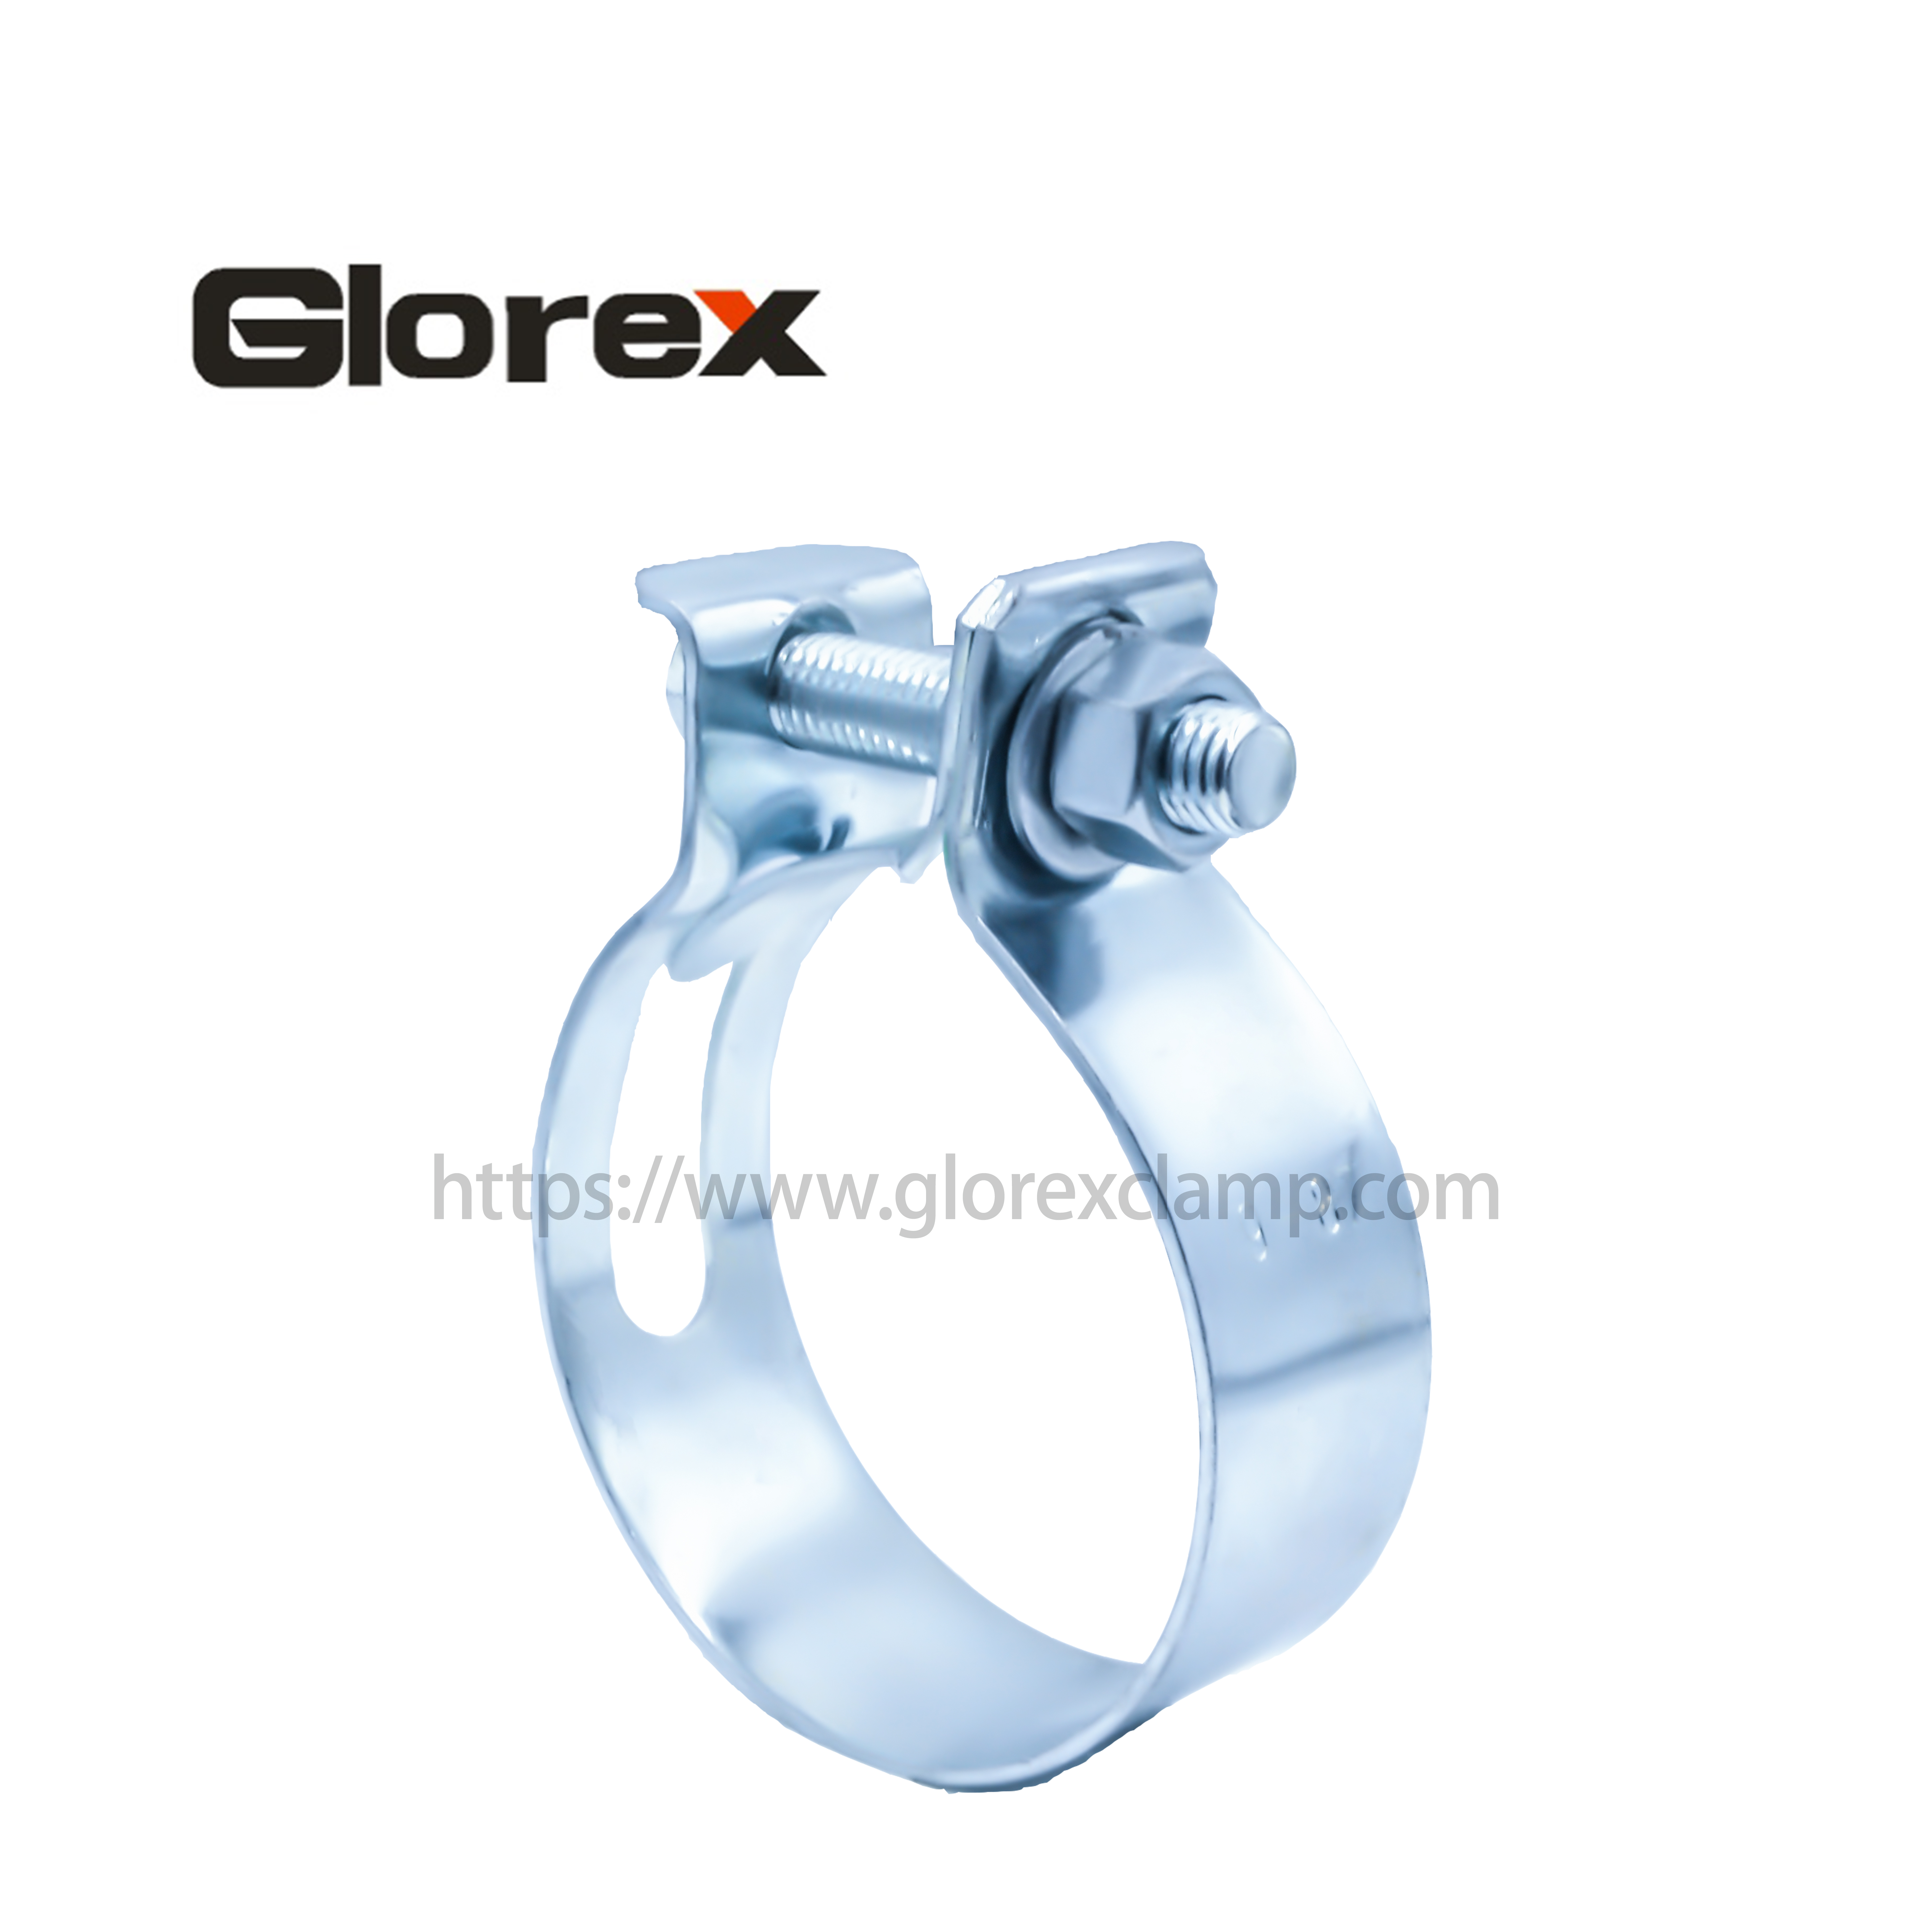 Best-Selling Bolt Pipe Clamp - The bay-type clamp – Glorex